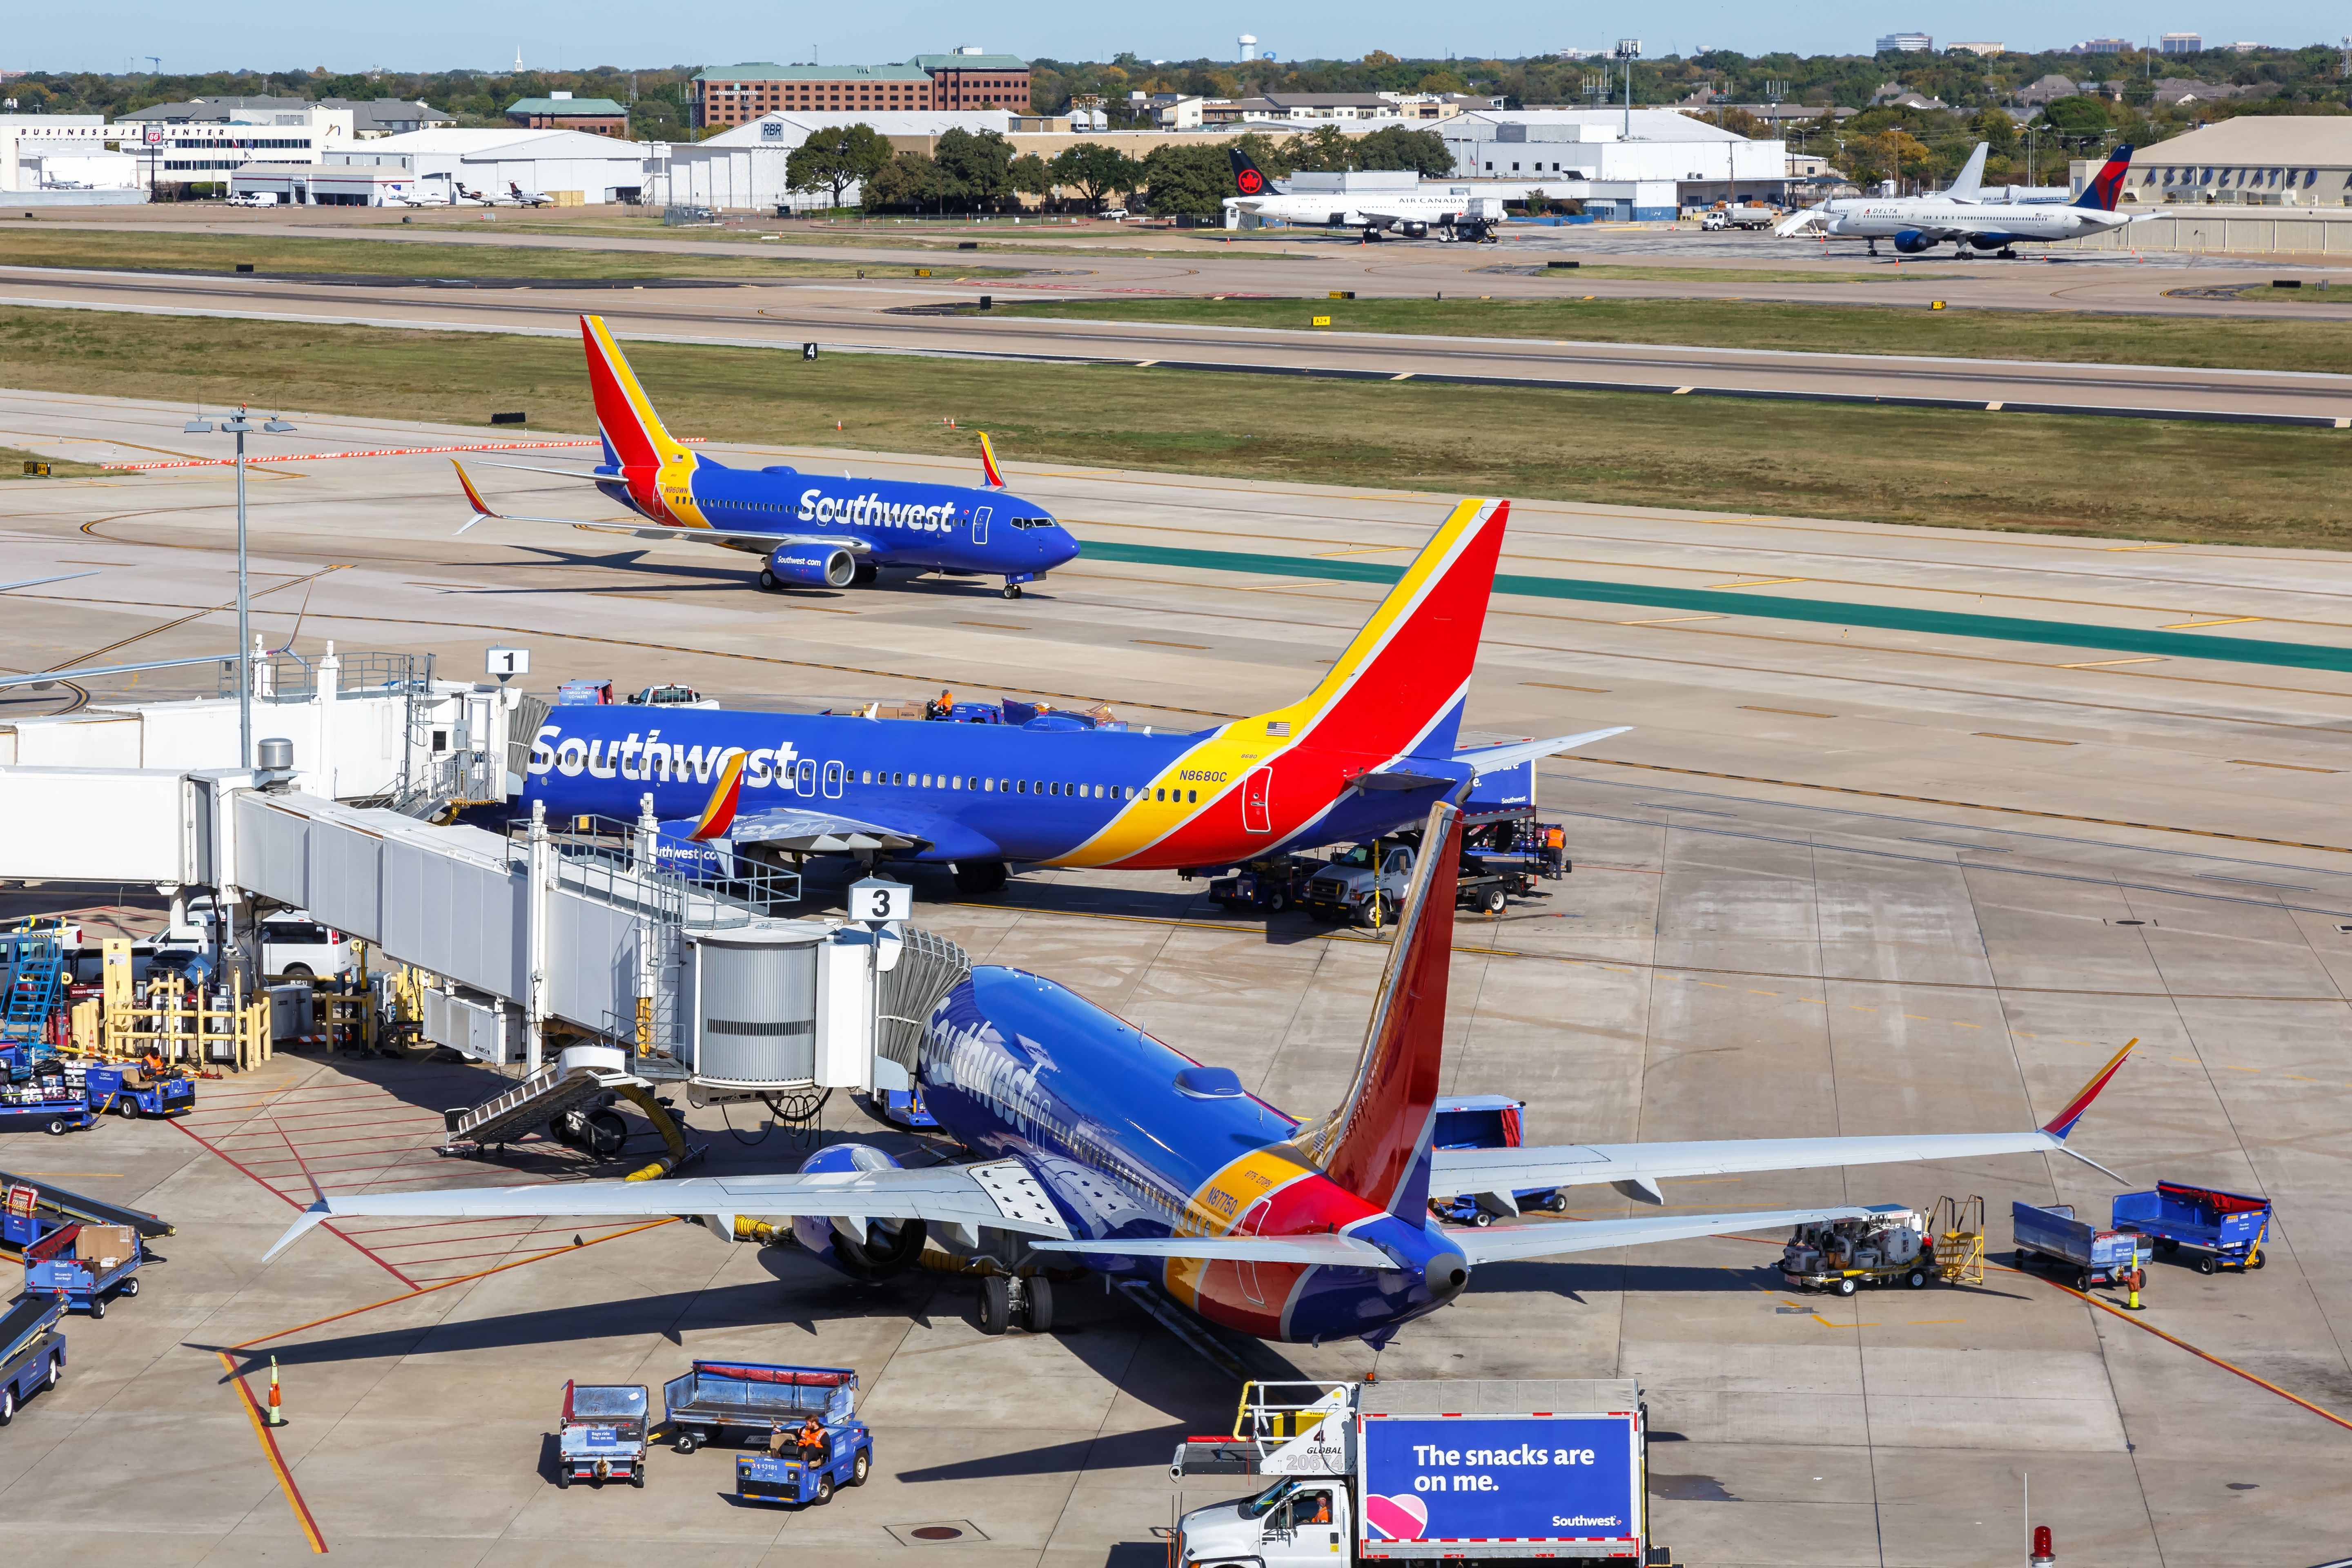 Southwest Airlines aircraft at Dallas Love Field.